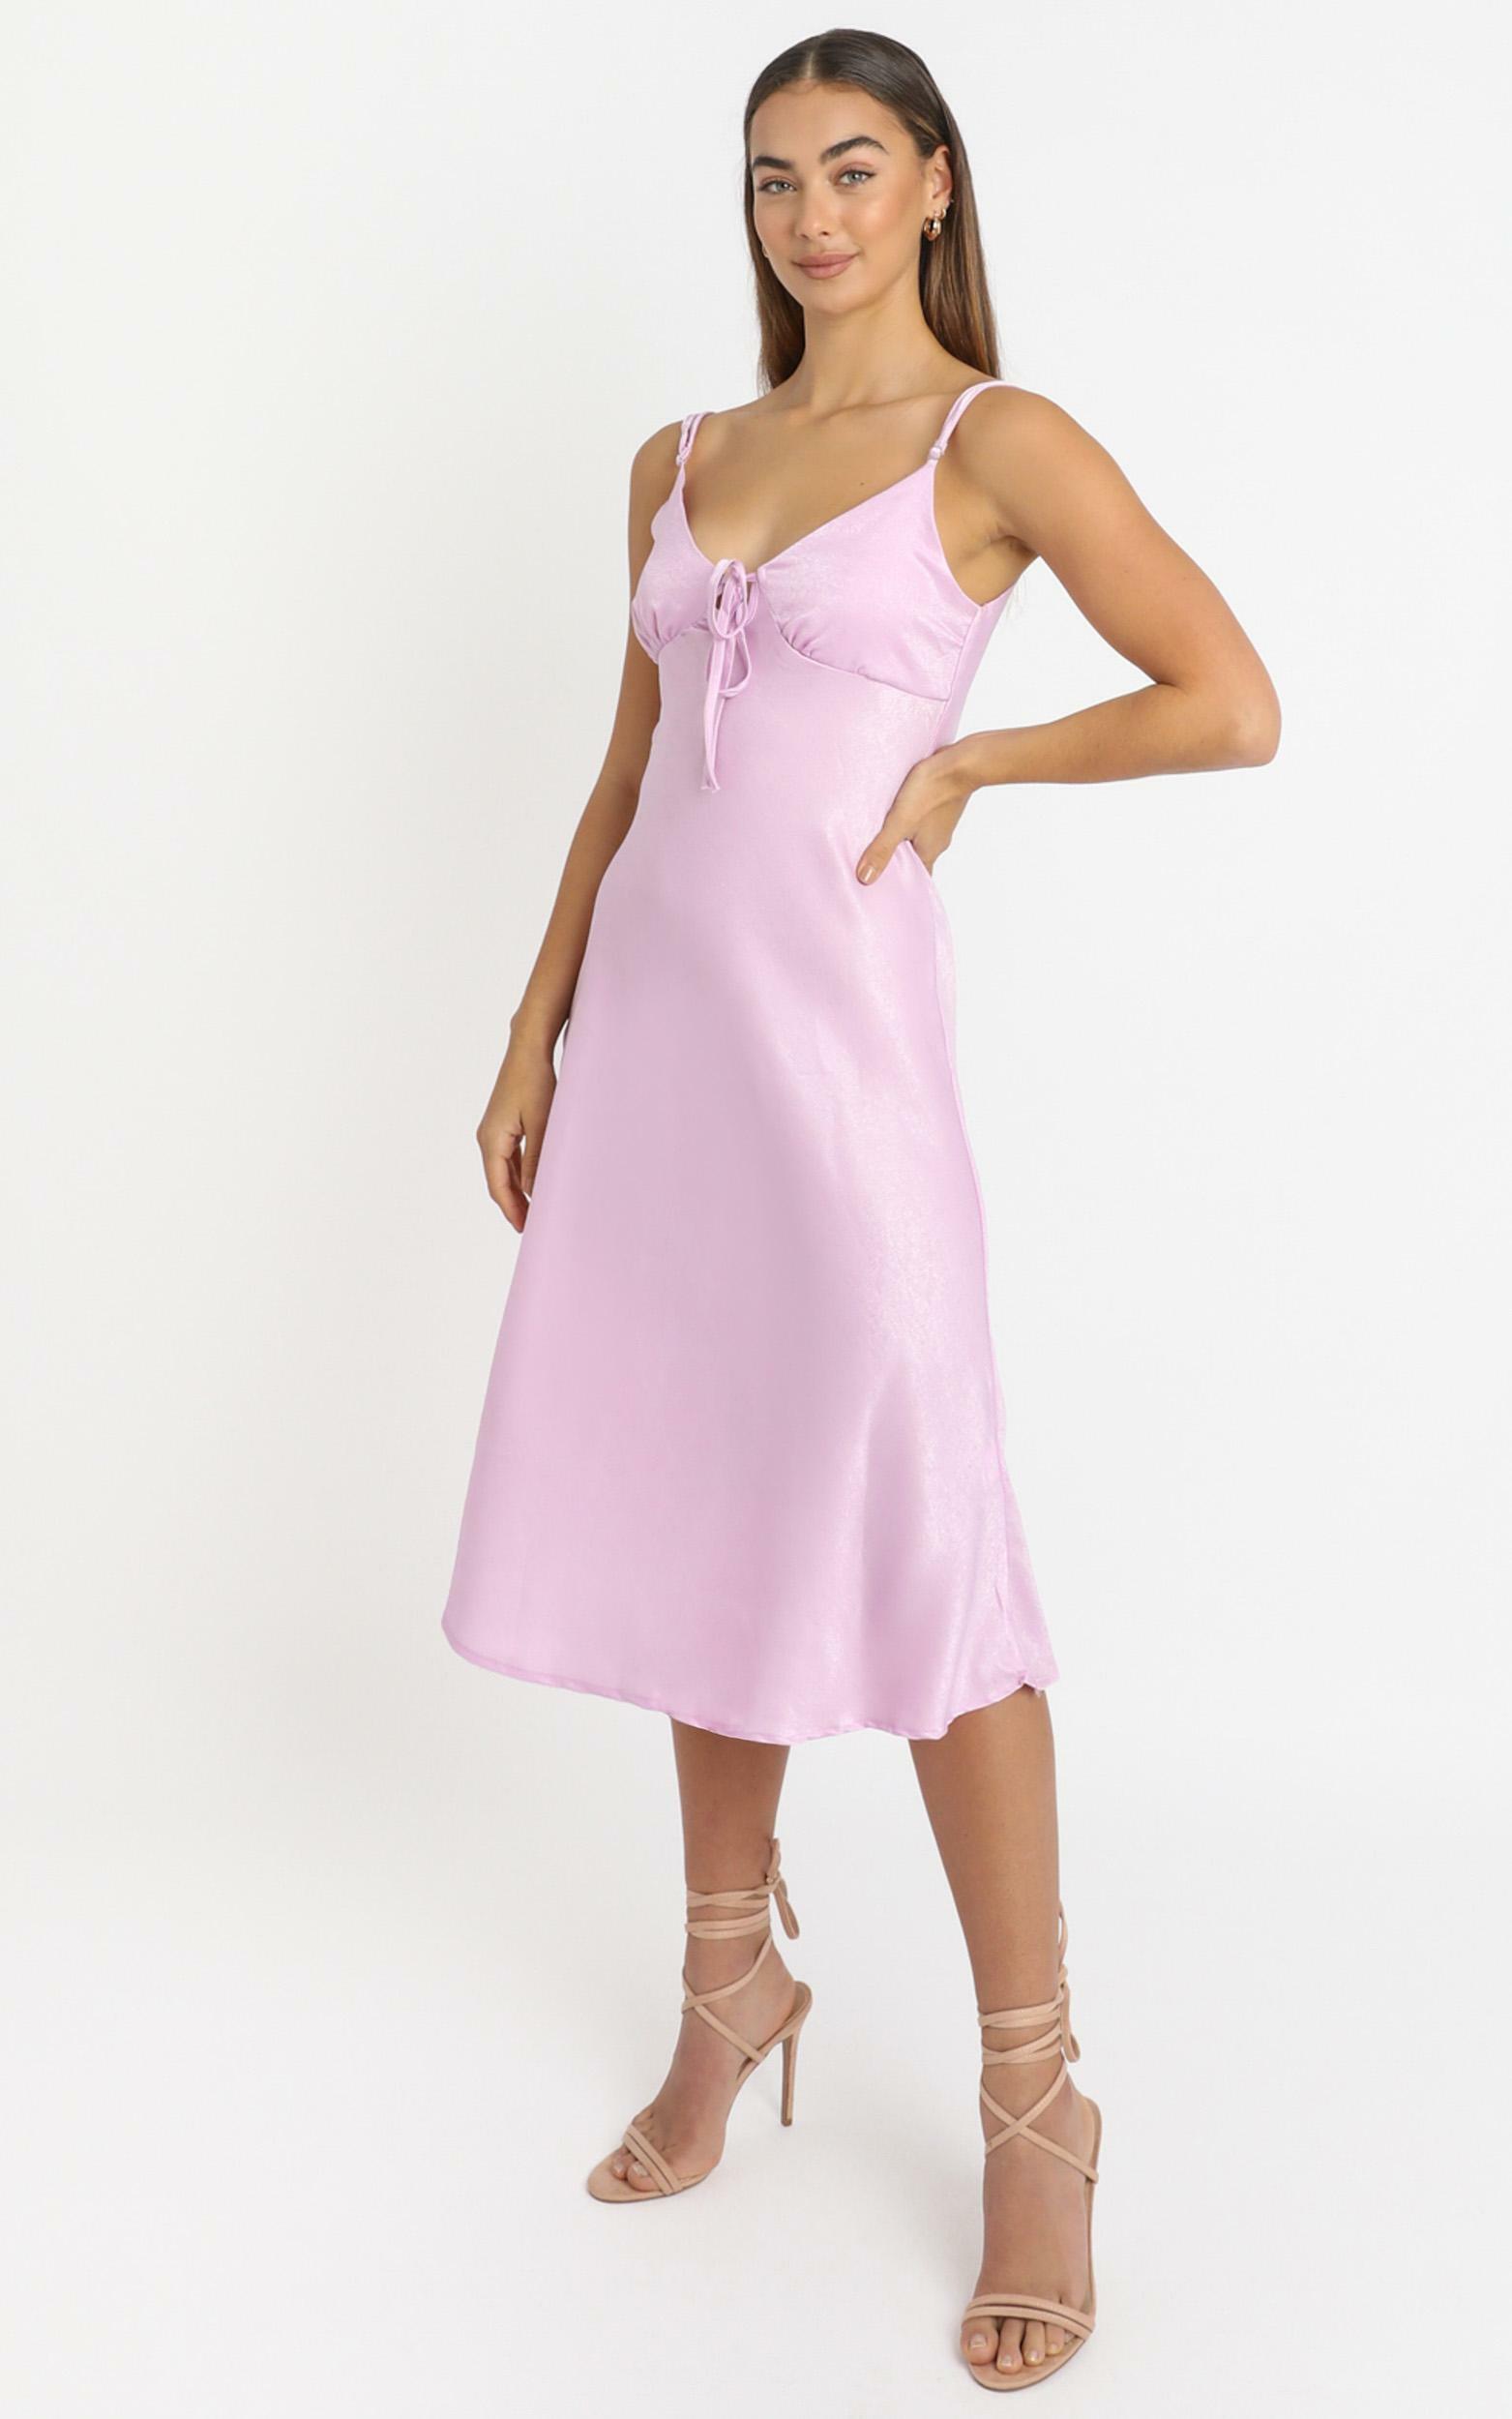 Toss The Dice dress in lilac - 16 (XXL), PRP1, hi-res image number null